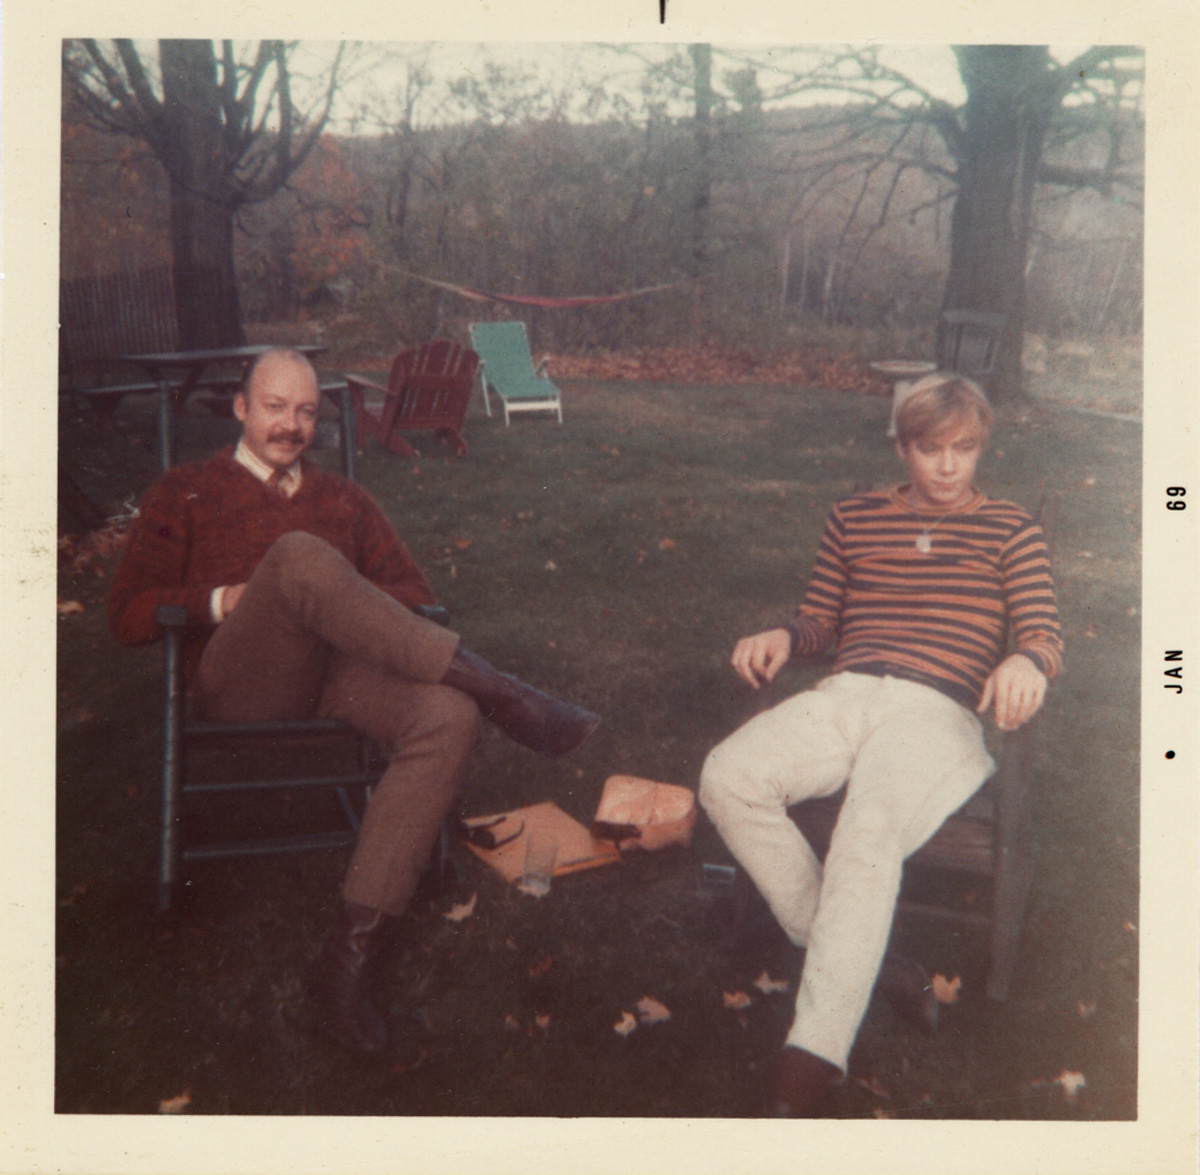 Snapshots of Jonathan Williams and Tom Meyer in the backyard of Paul and Nancy Metcalf's home in Becket, Massachusetts, January 1969. From the Paul Metcalf Archive